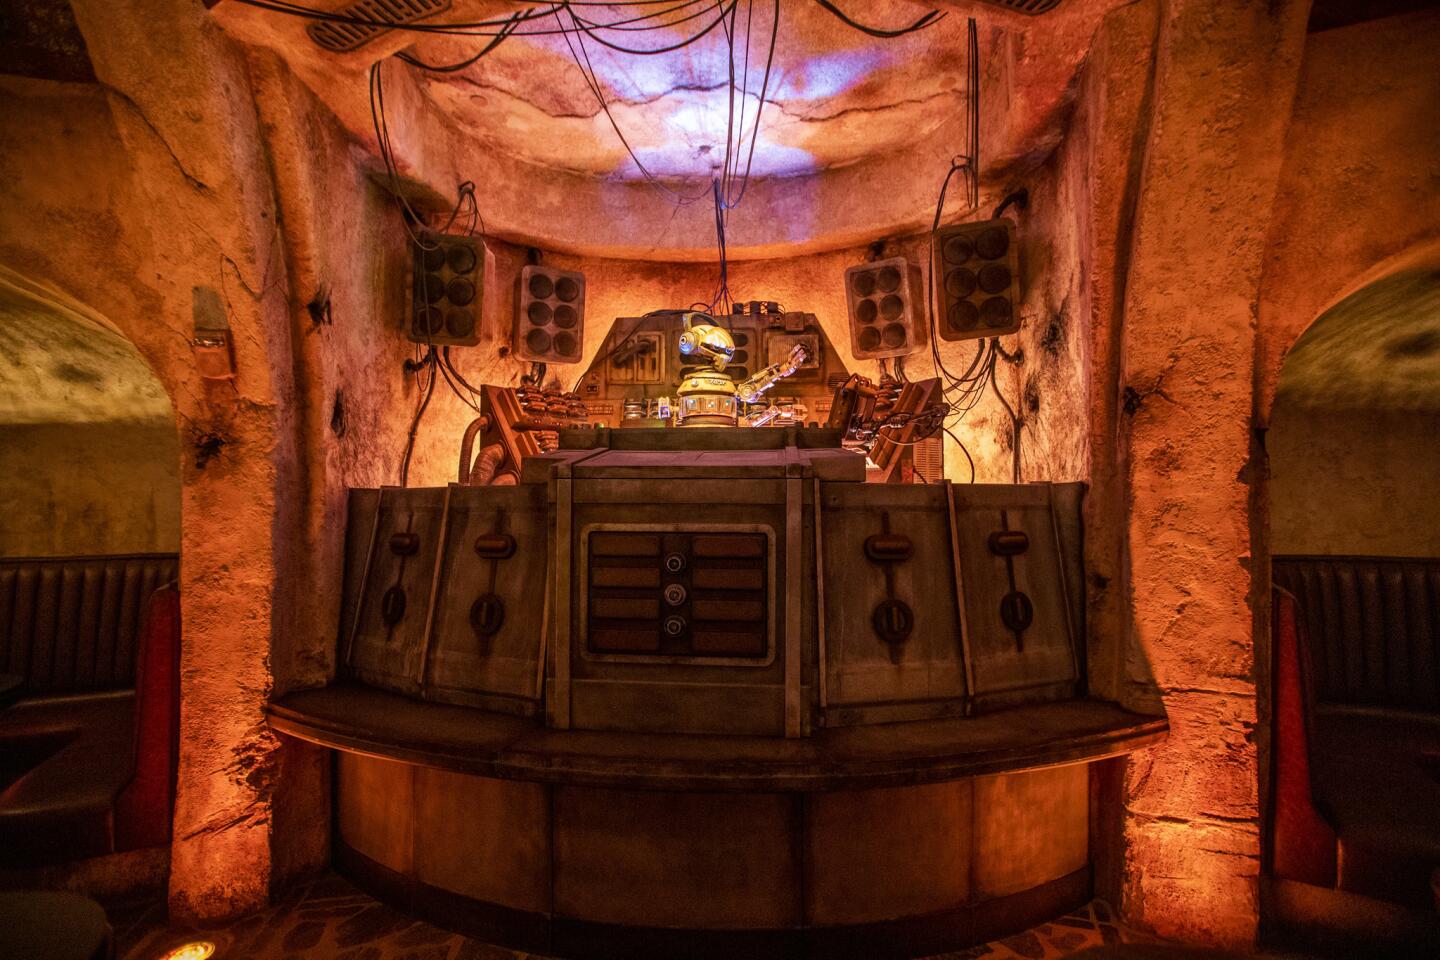 D.J. Rex works in Oga's Cantina after his space ship crashed as media members get a preview during the Star Wars: Galaxy's Edge media preview.